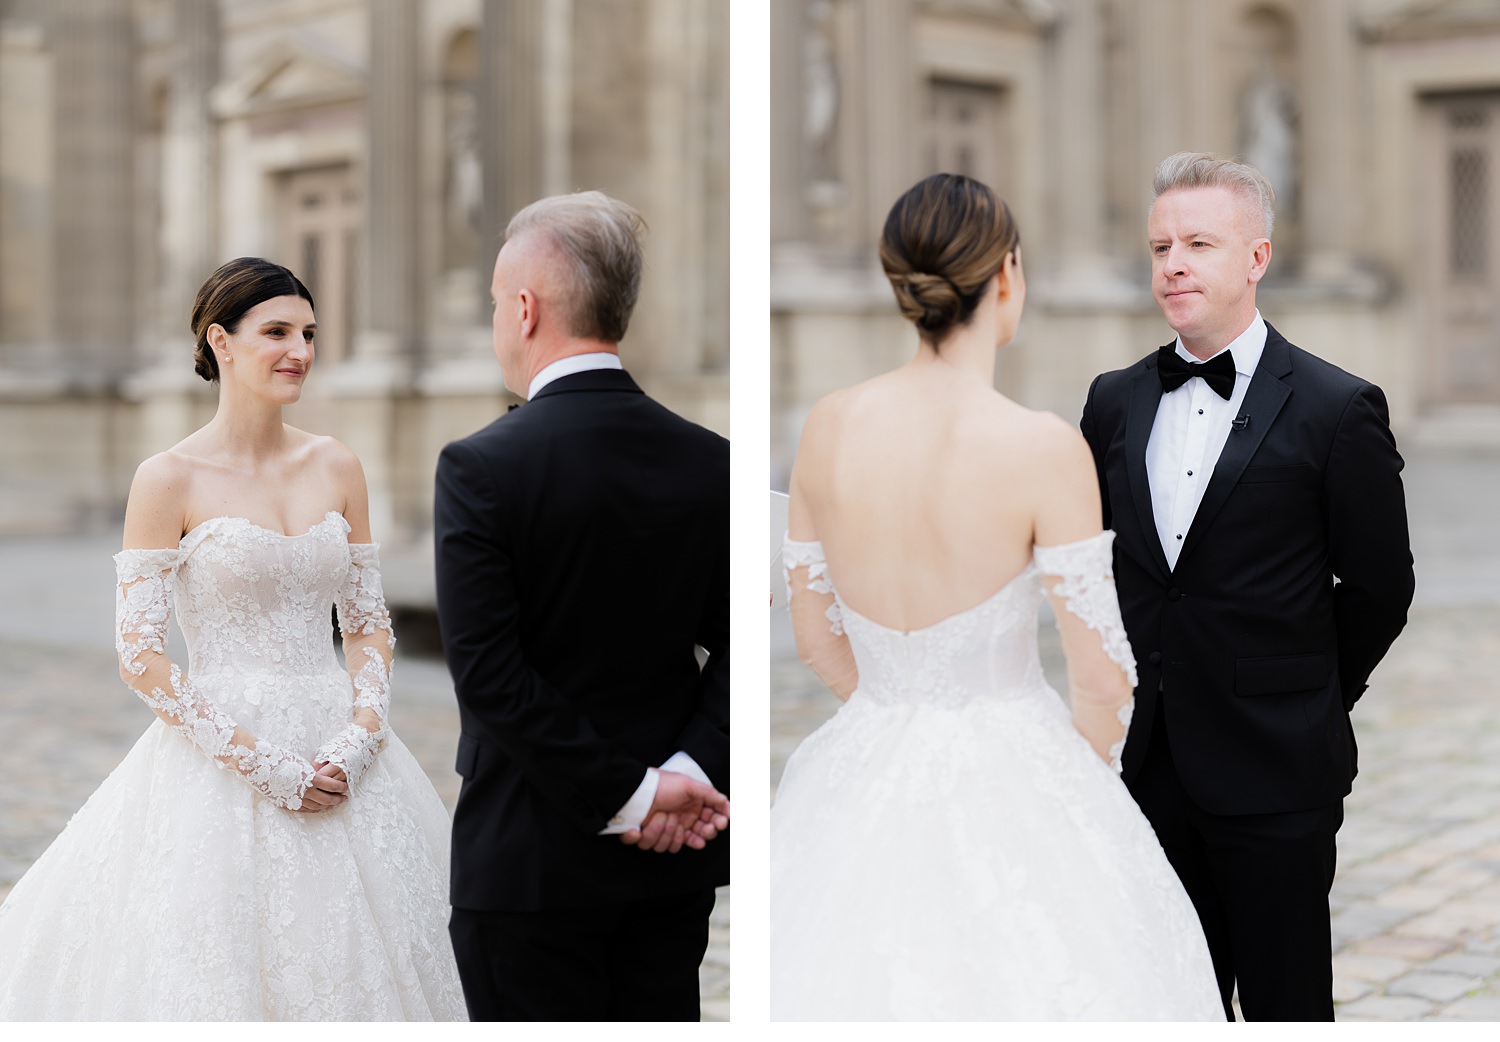 Elopement ceremony in Paris, Ceremony at the Louvre, Get married in Paris, Elope to Paris